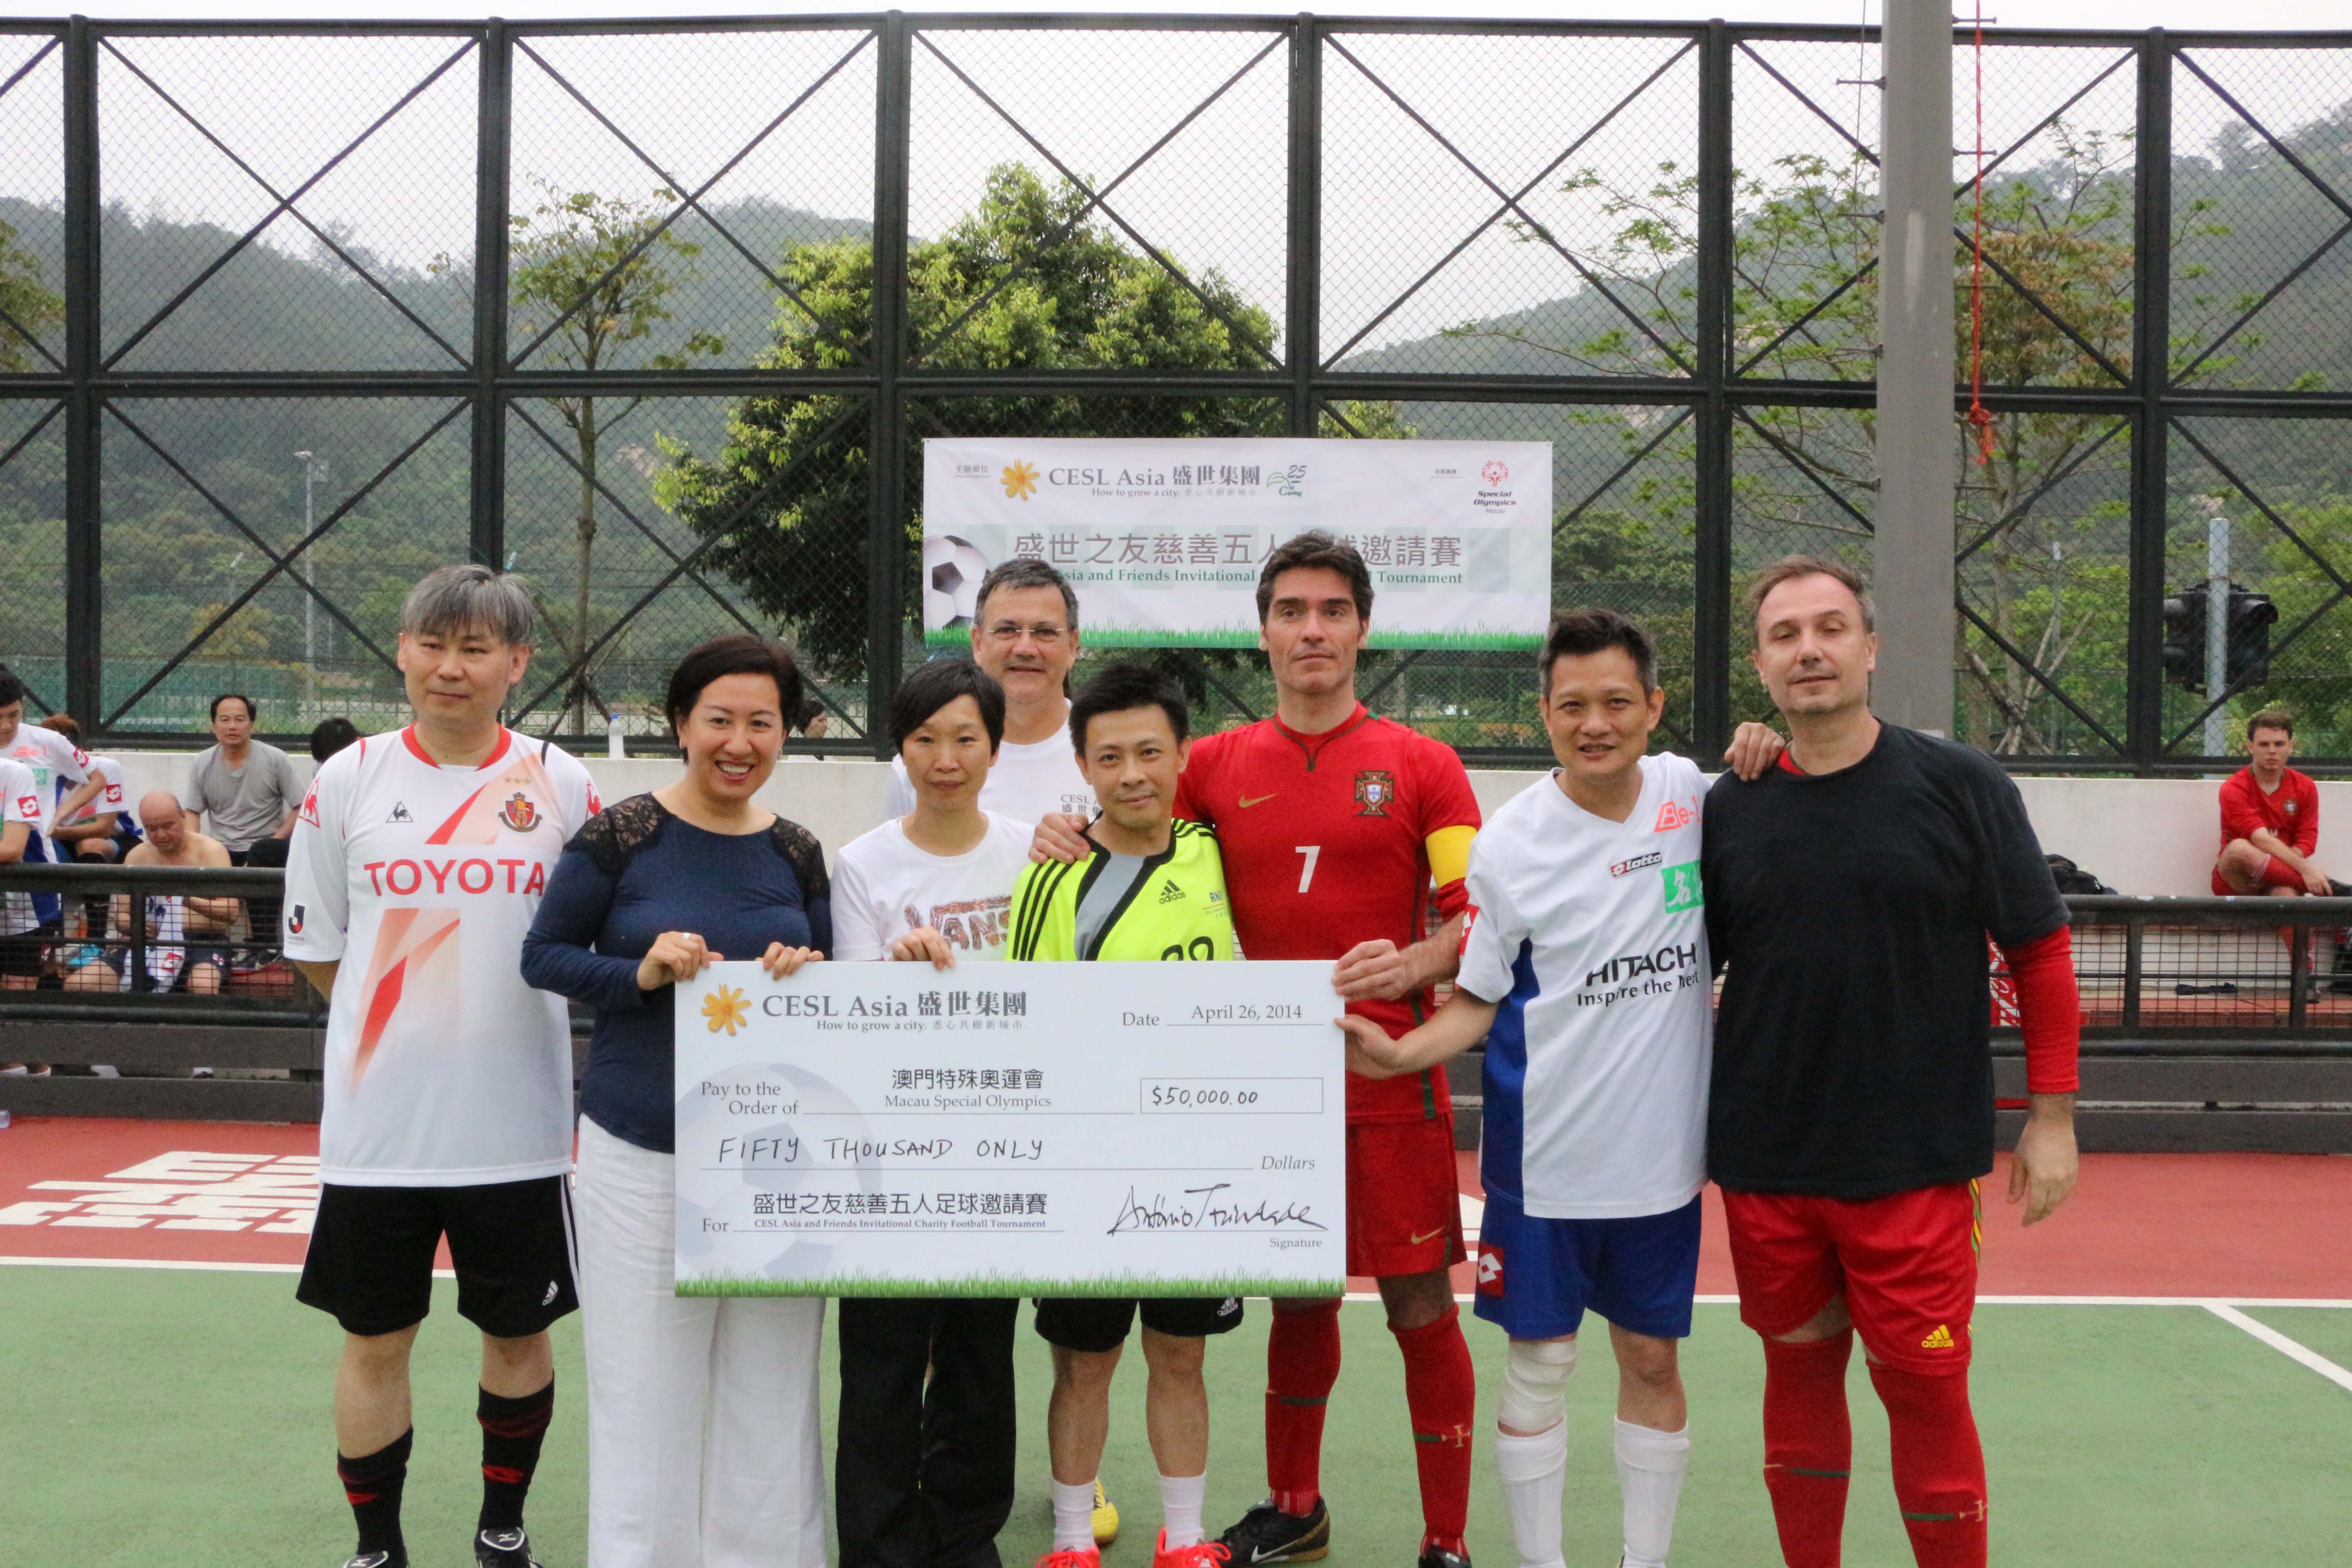 CESL Asia and Friends Invitational Charity Football Tournament (2014/04/26)